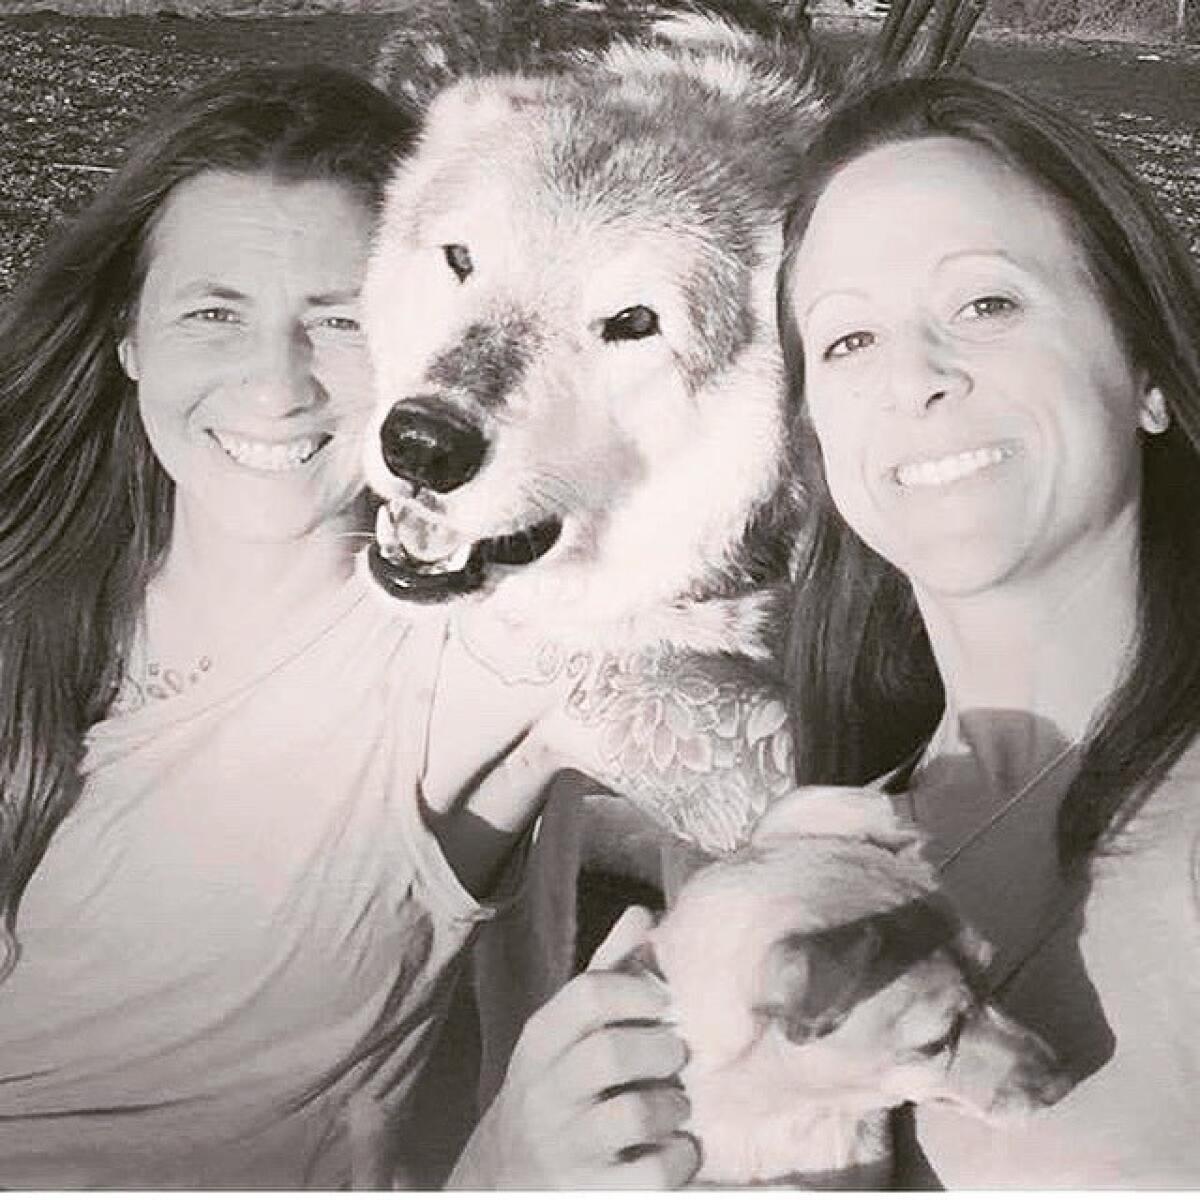 Lauren Freiser, left, and Lori DeProspo, right, with their wolf/malamute hybrid "Wolfie" at the King Wolf Animal Sanctuary in Ramona.